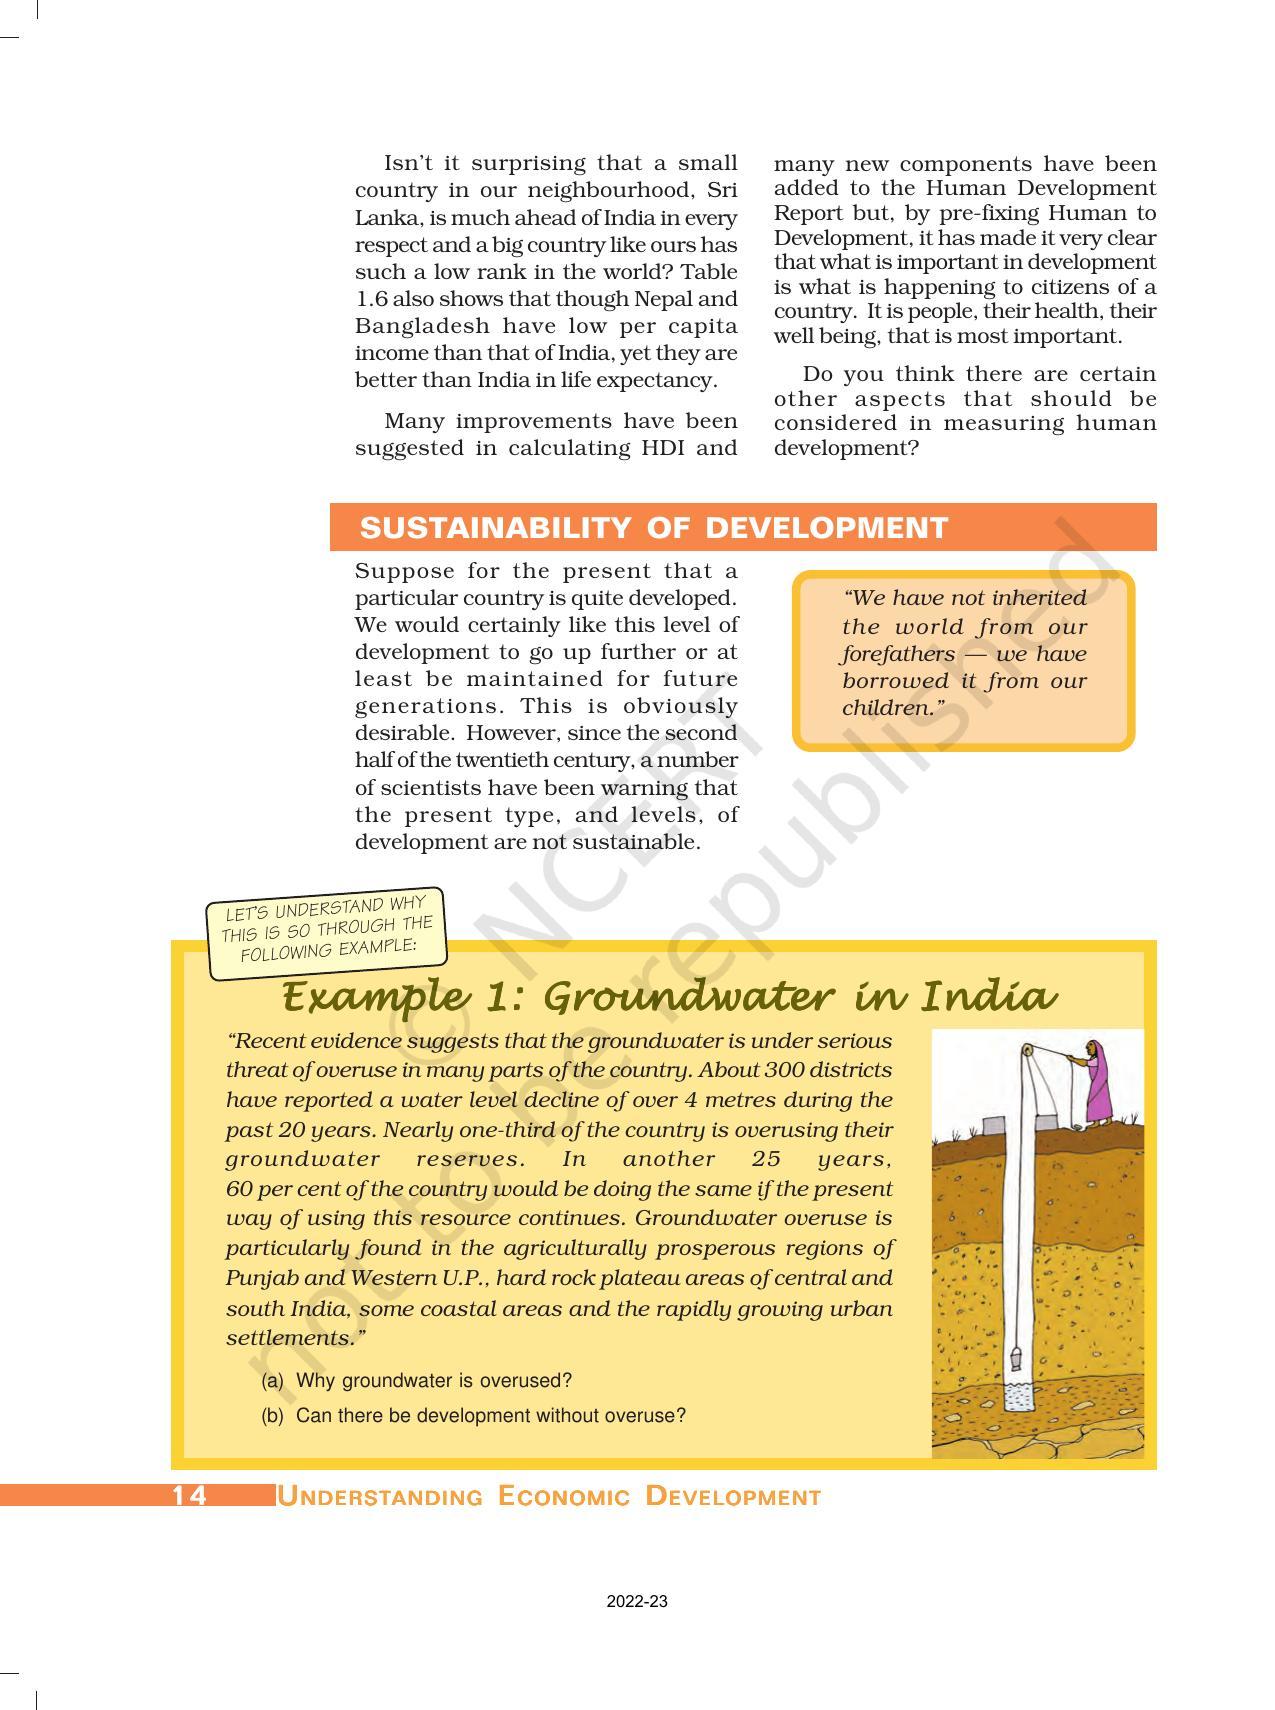 NCERT Book for Class 10 Economics Chapter 1 Development - Page 13